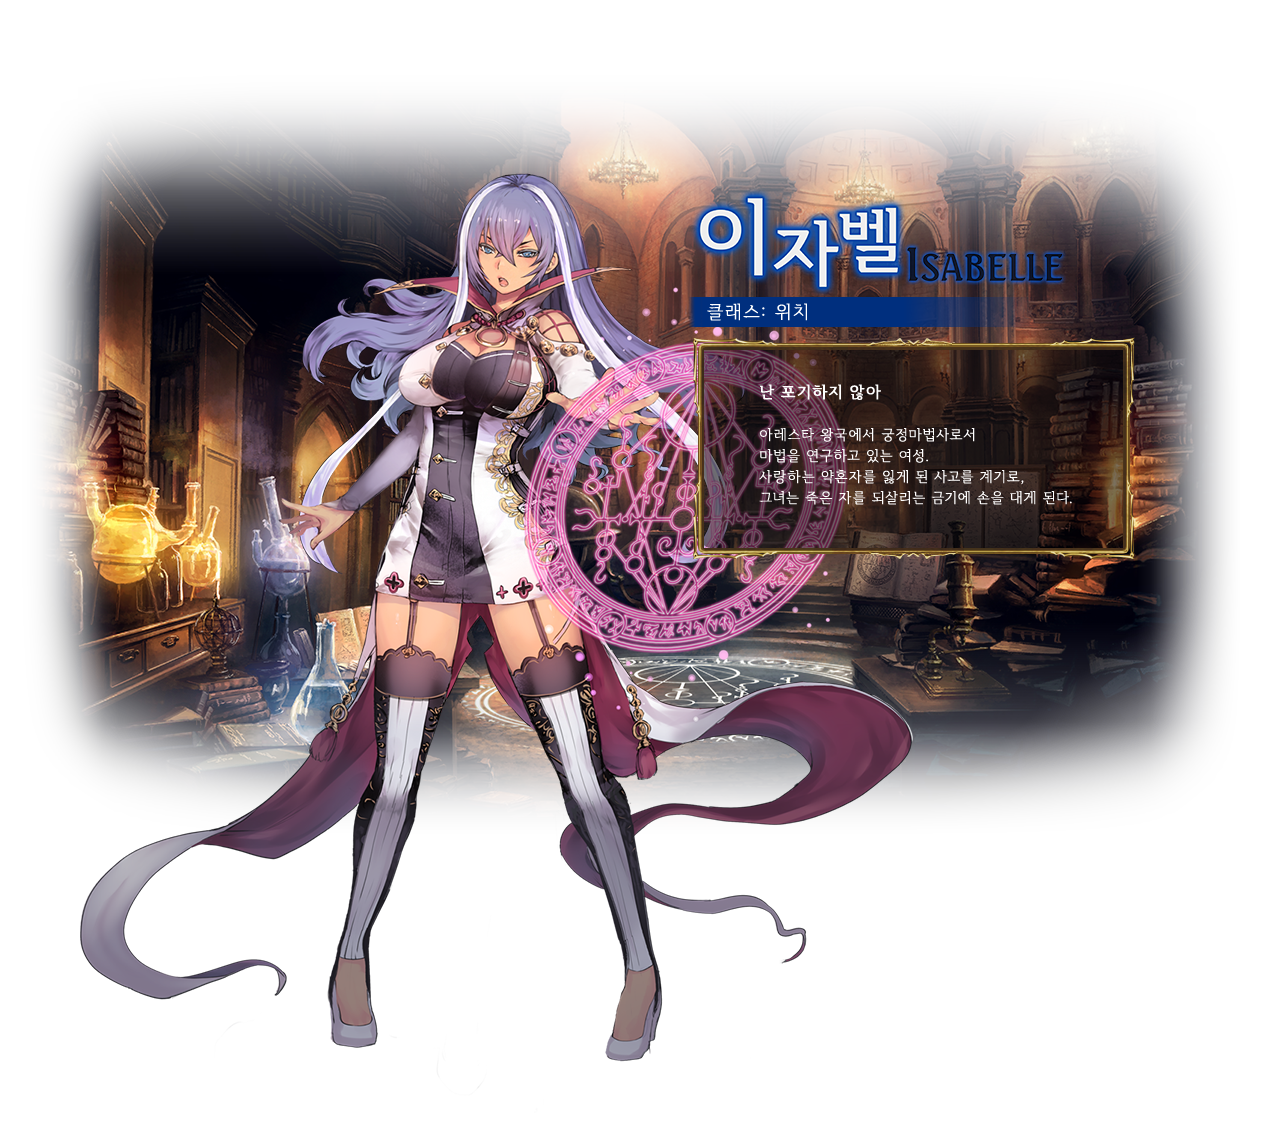 Isabelle / Class: Runecraft / Isabelle is an alchemical researcher. The tragic death of her beloved fiancé made her obsessed with the idea of resurrecting the dead.